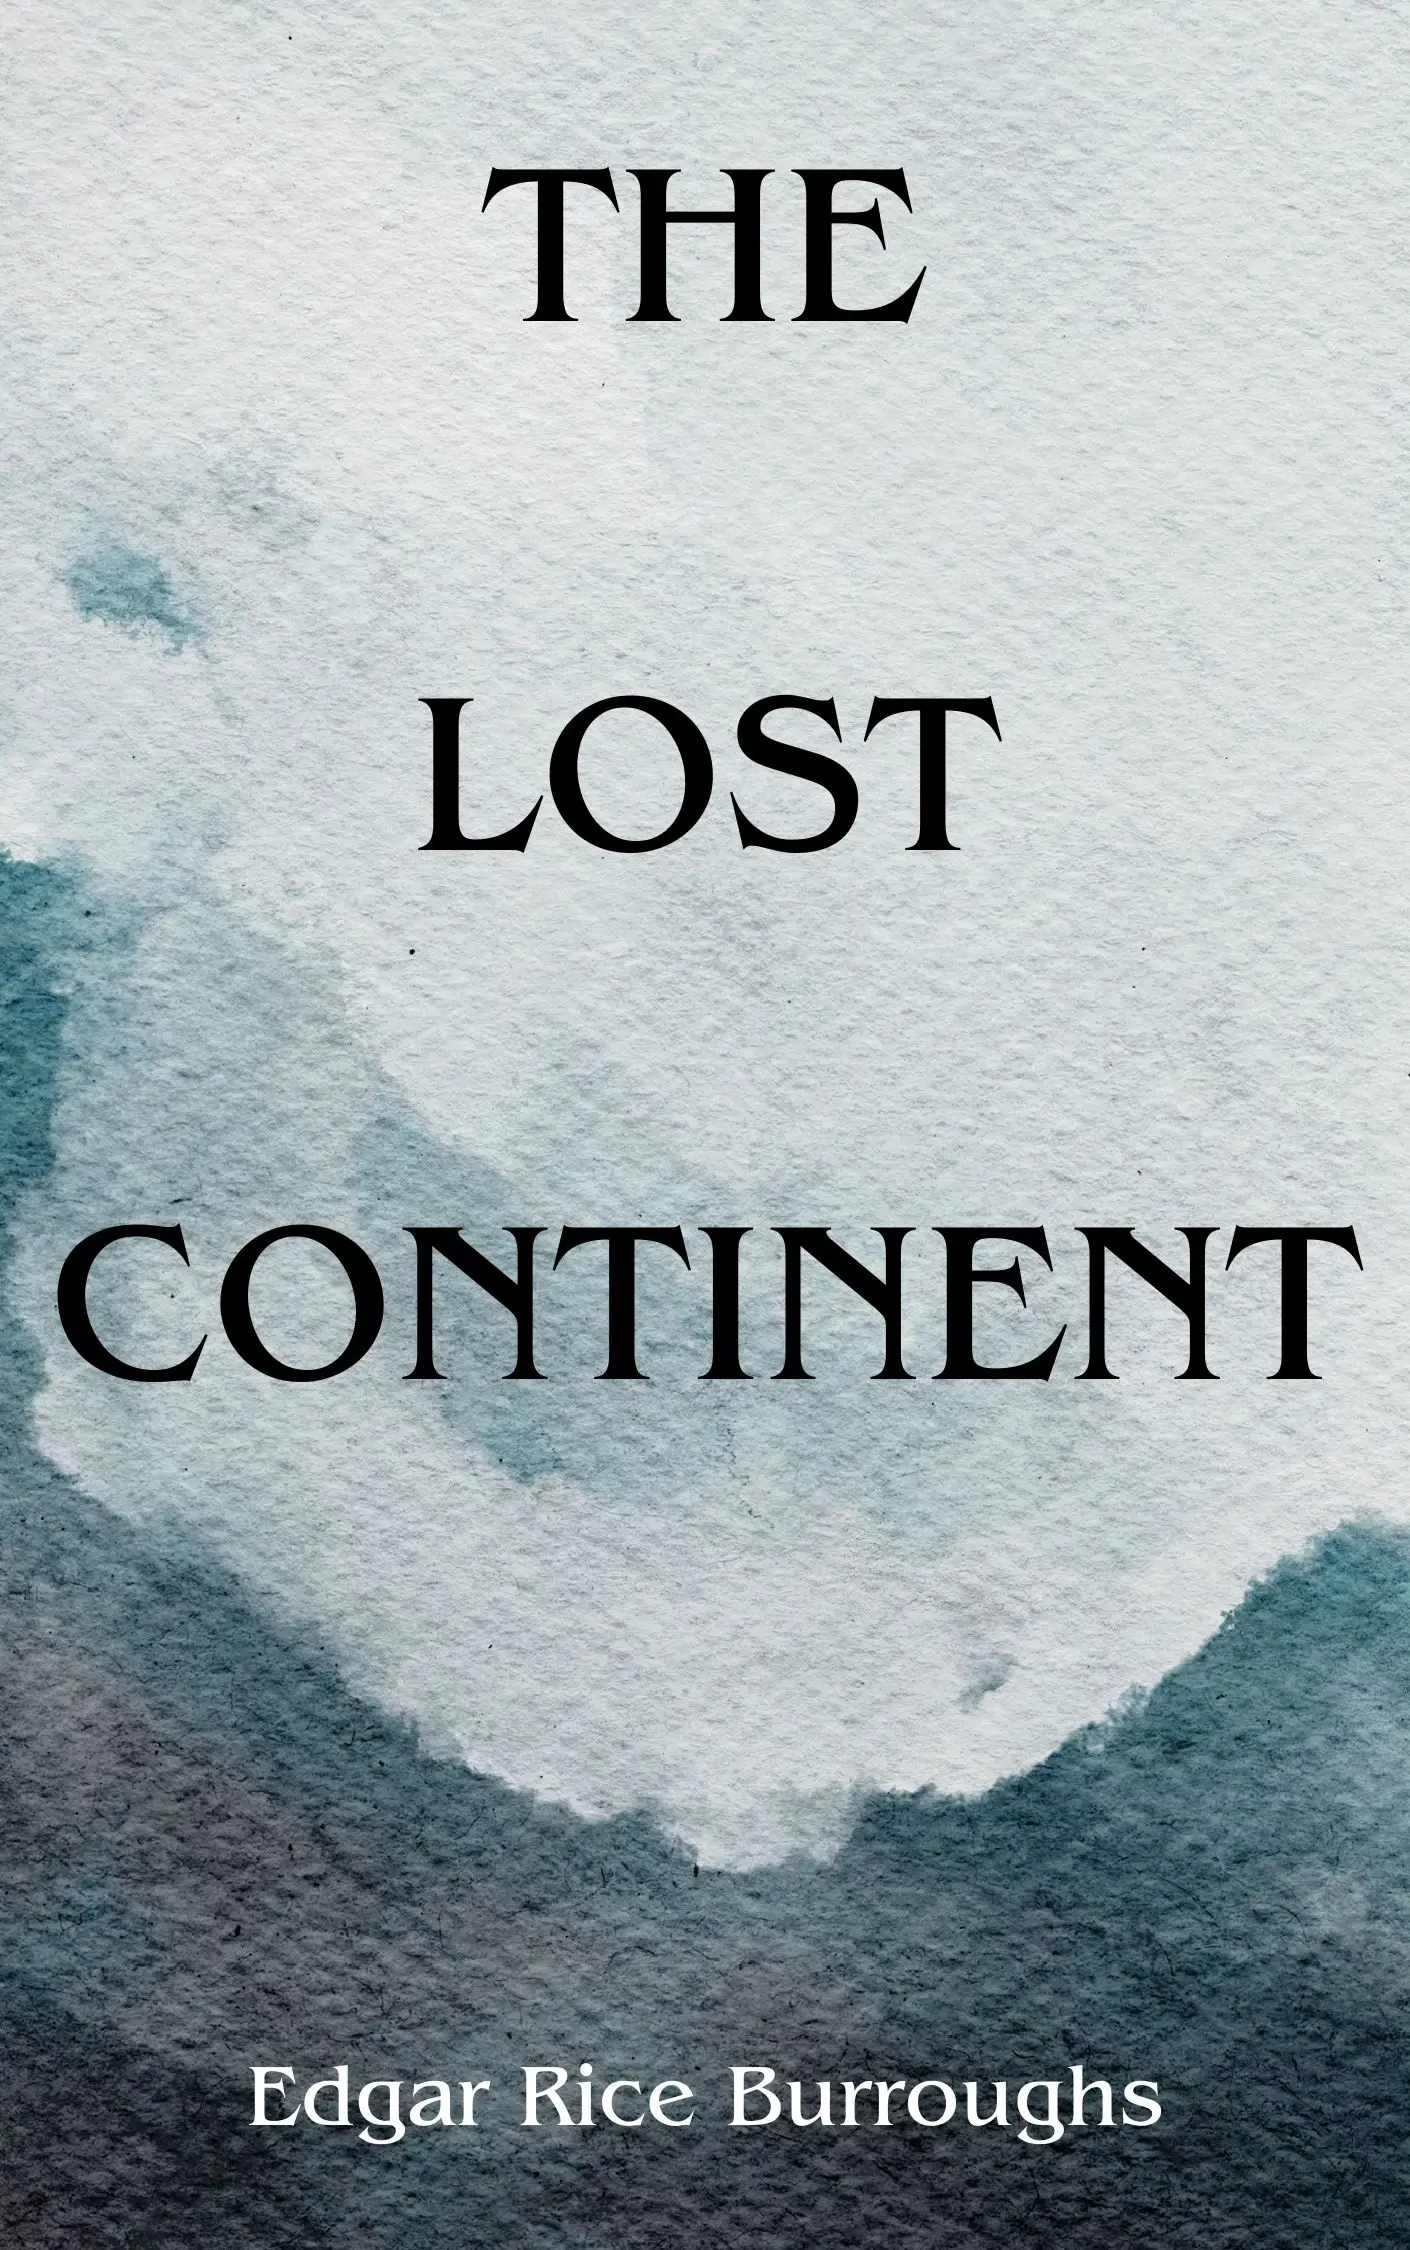 The Lost Continent by Edgar Rice Burroughs Audiobook